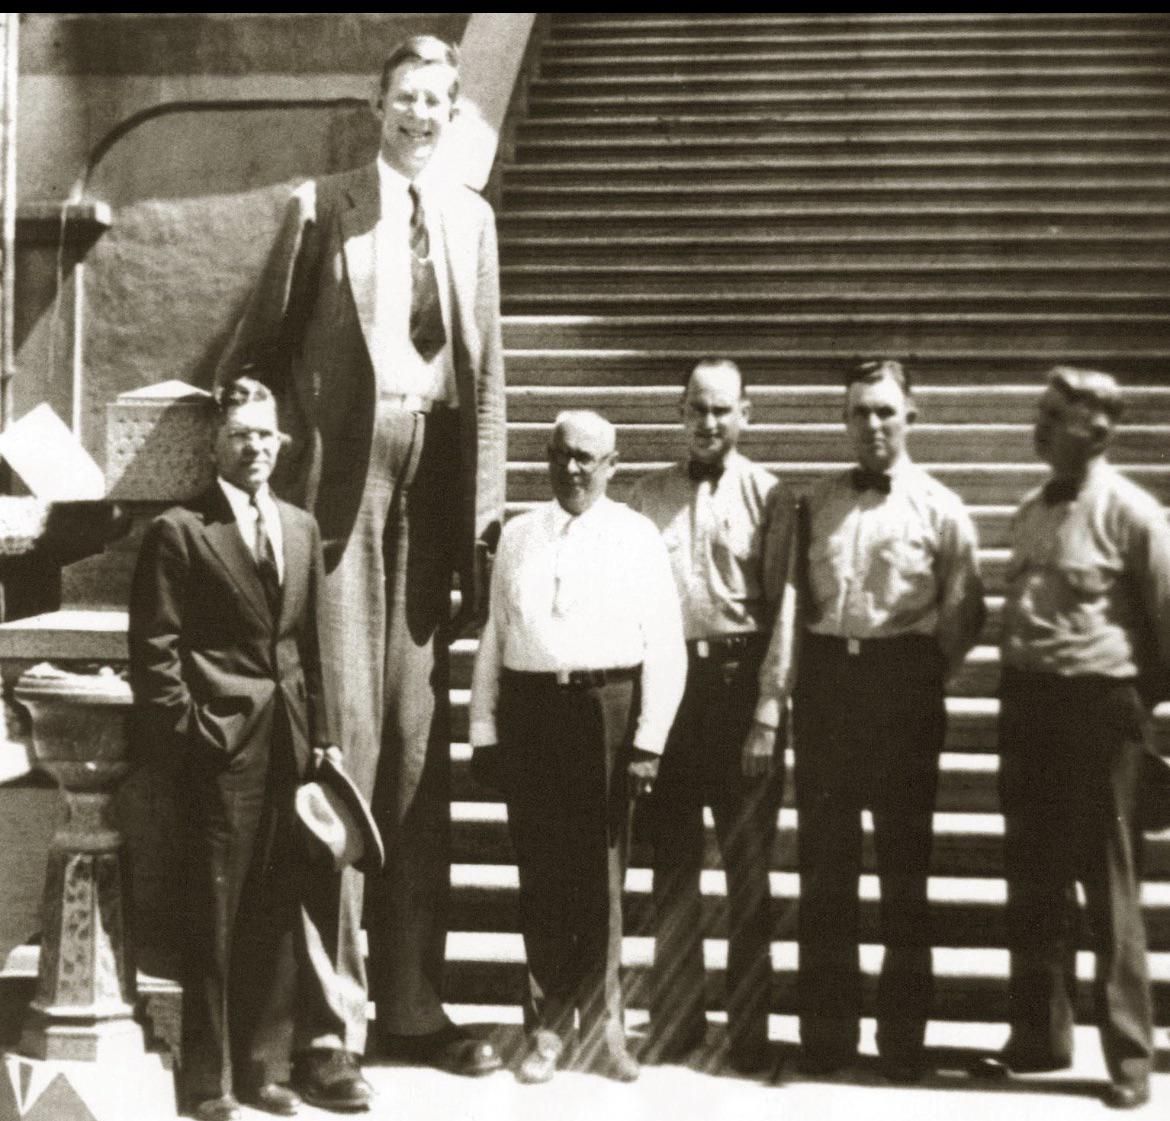 The World's First 6-foot Tall Man standing next to 5'11" men,